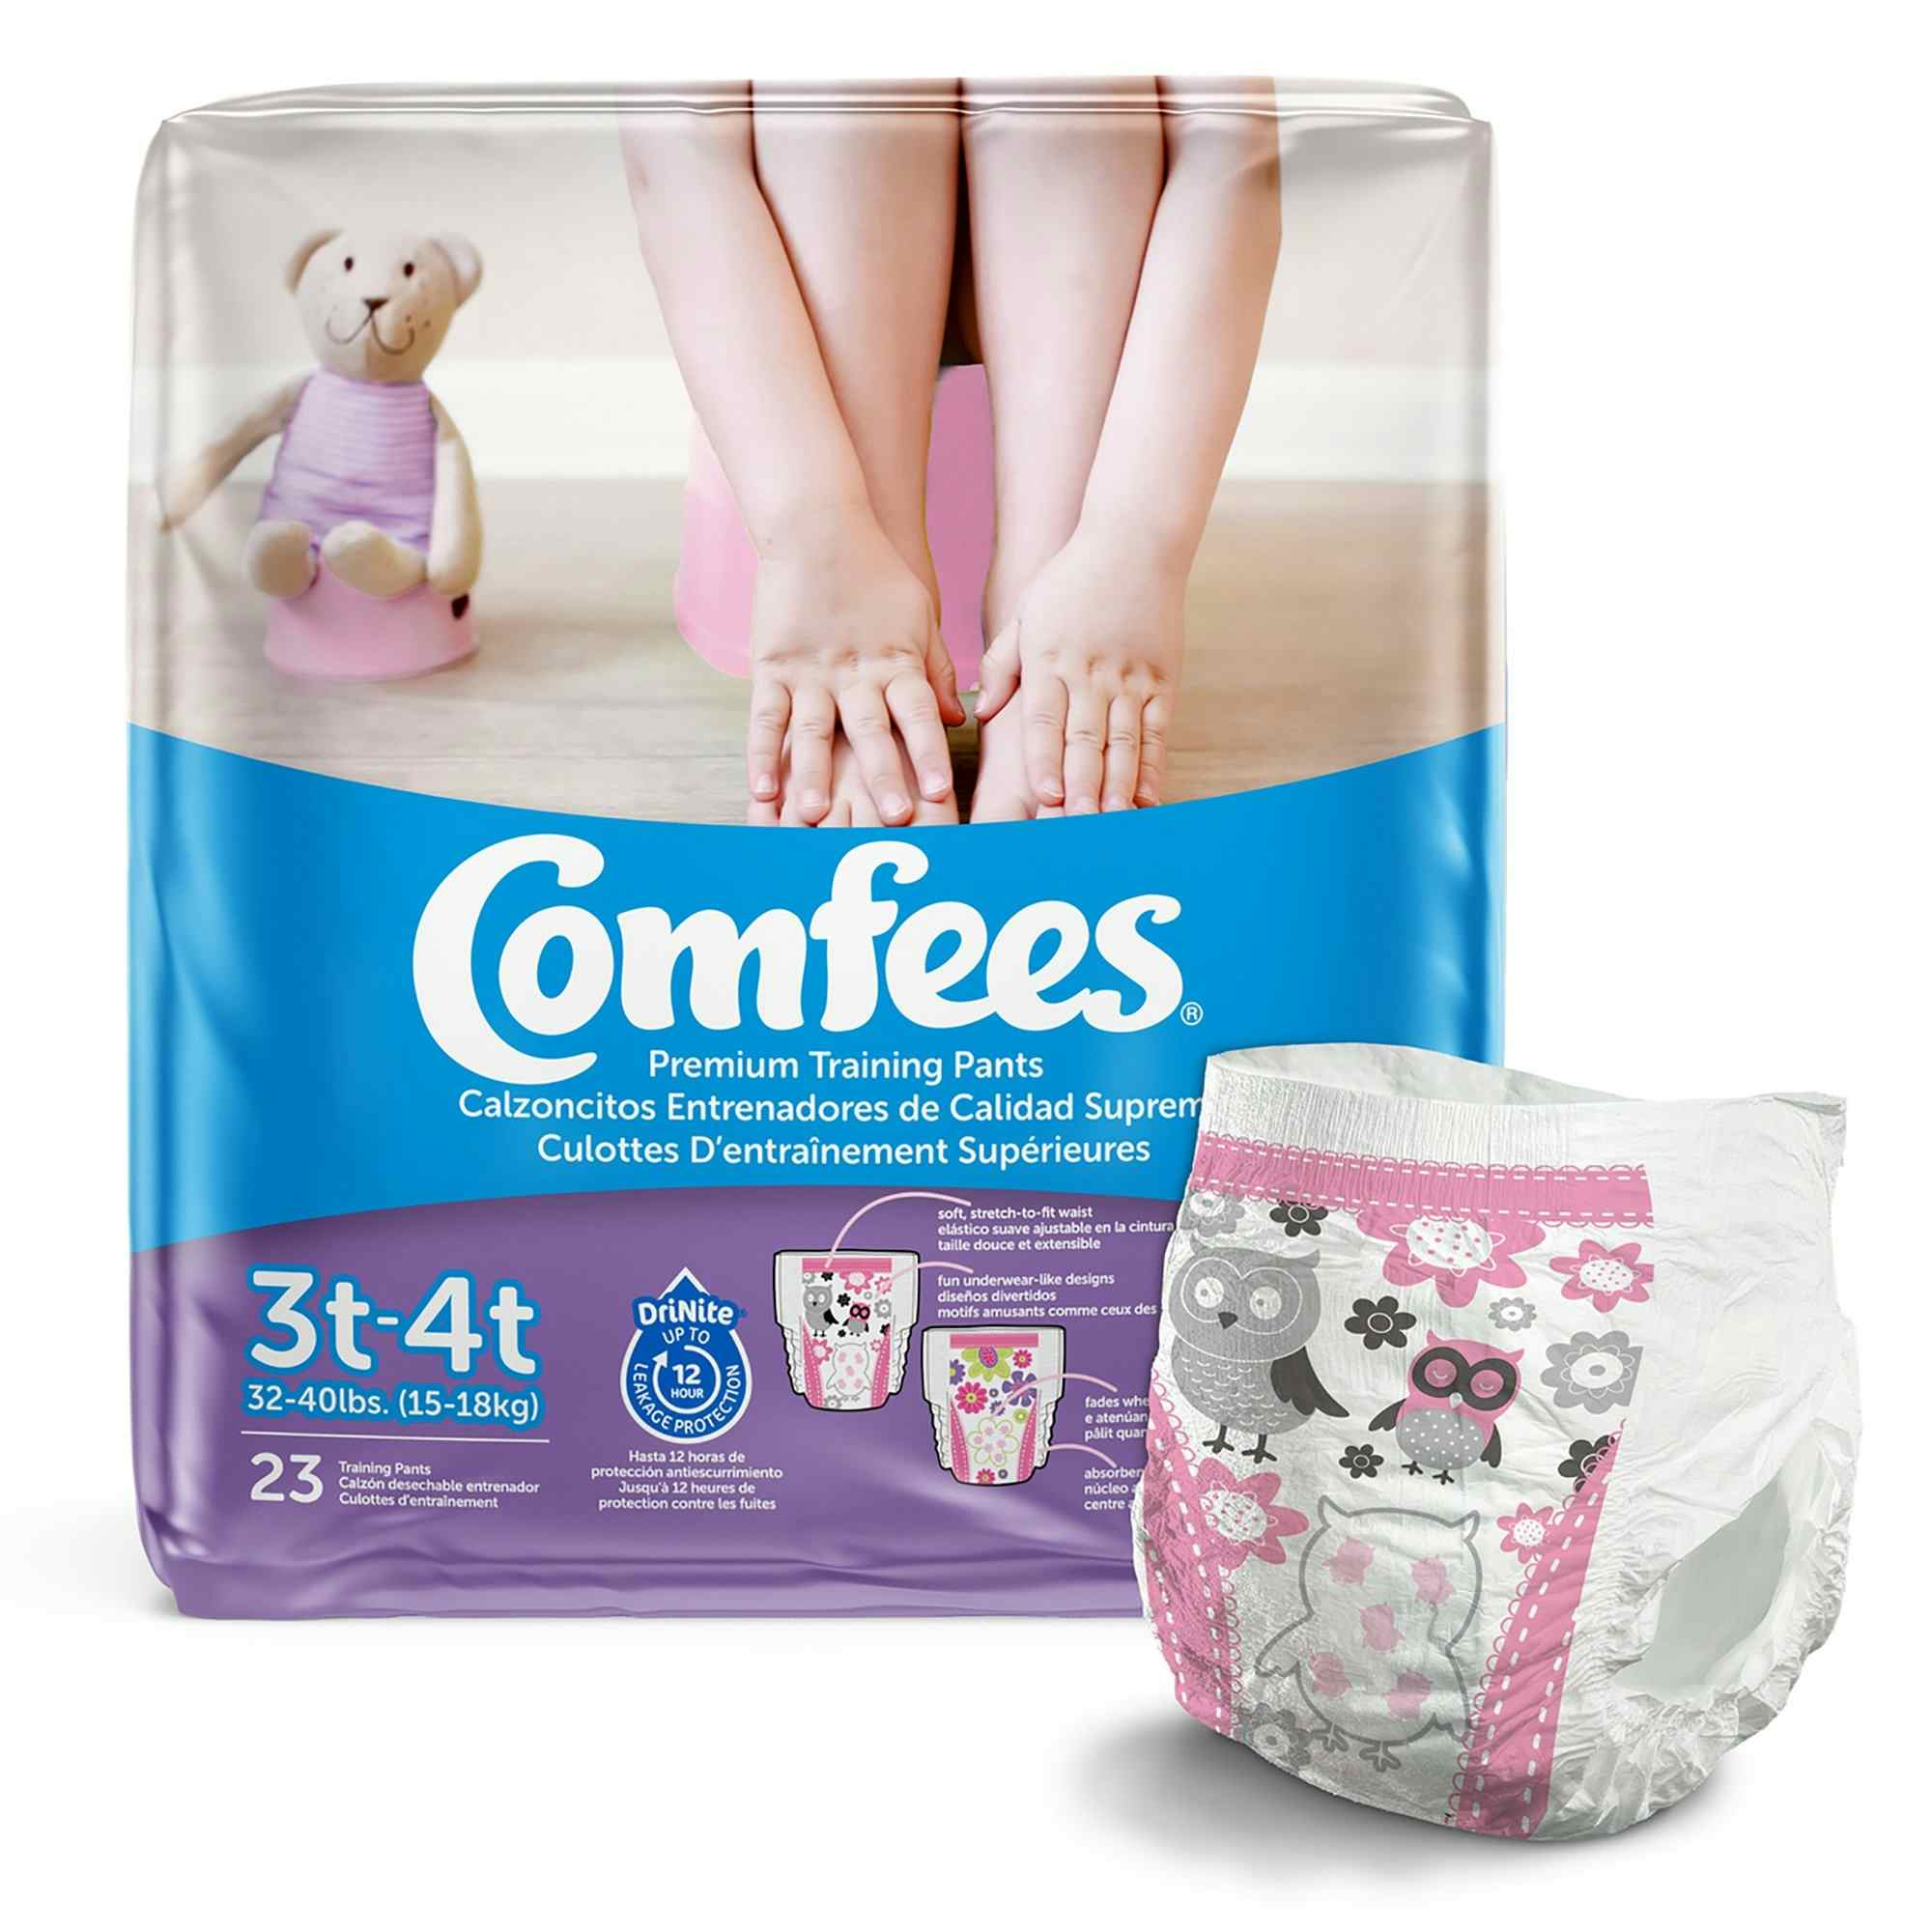 Comfees Toddler Premium Training Pants, Moderate Absorbency, CMF-G3, 3T to 4T (32 - 40 lbs.) - Girl - Bag of 23